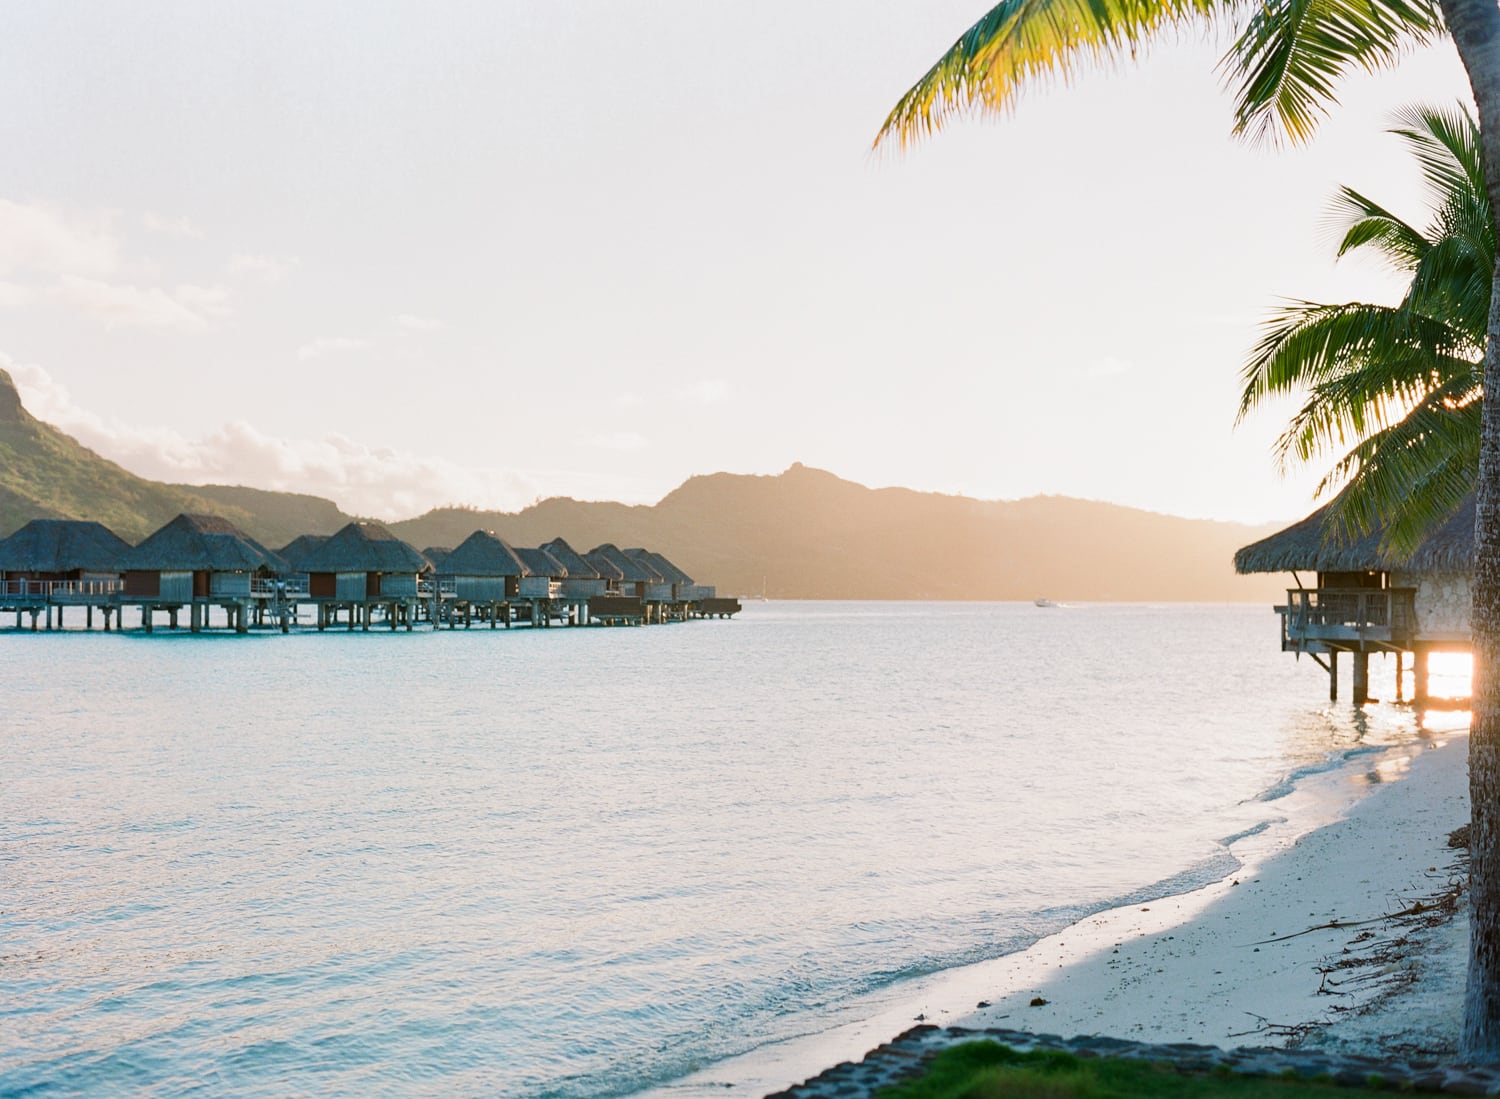 View on the beach and the overwater bungalow at the Four Seasons Bora Bora Resort